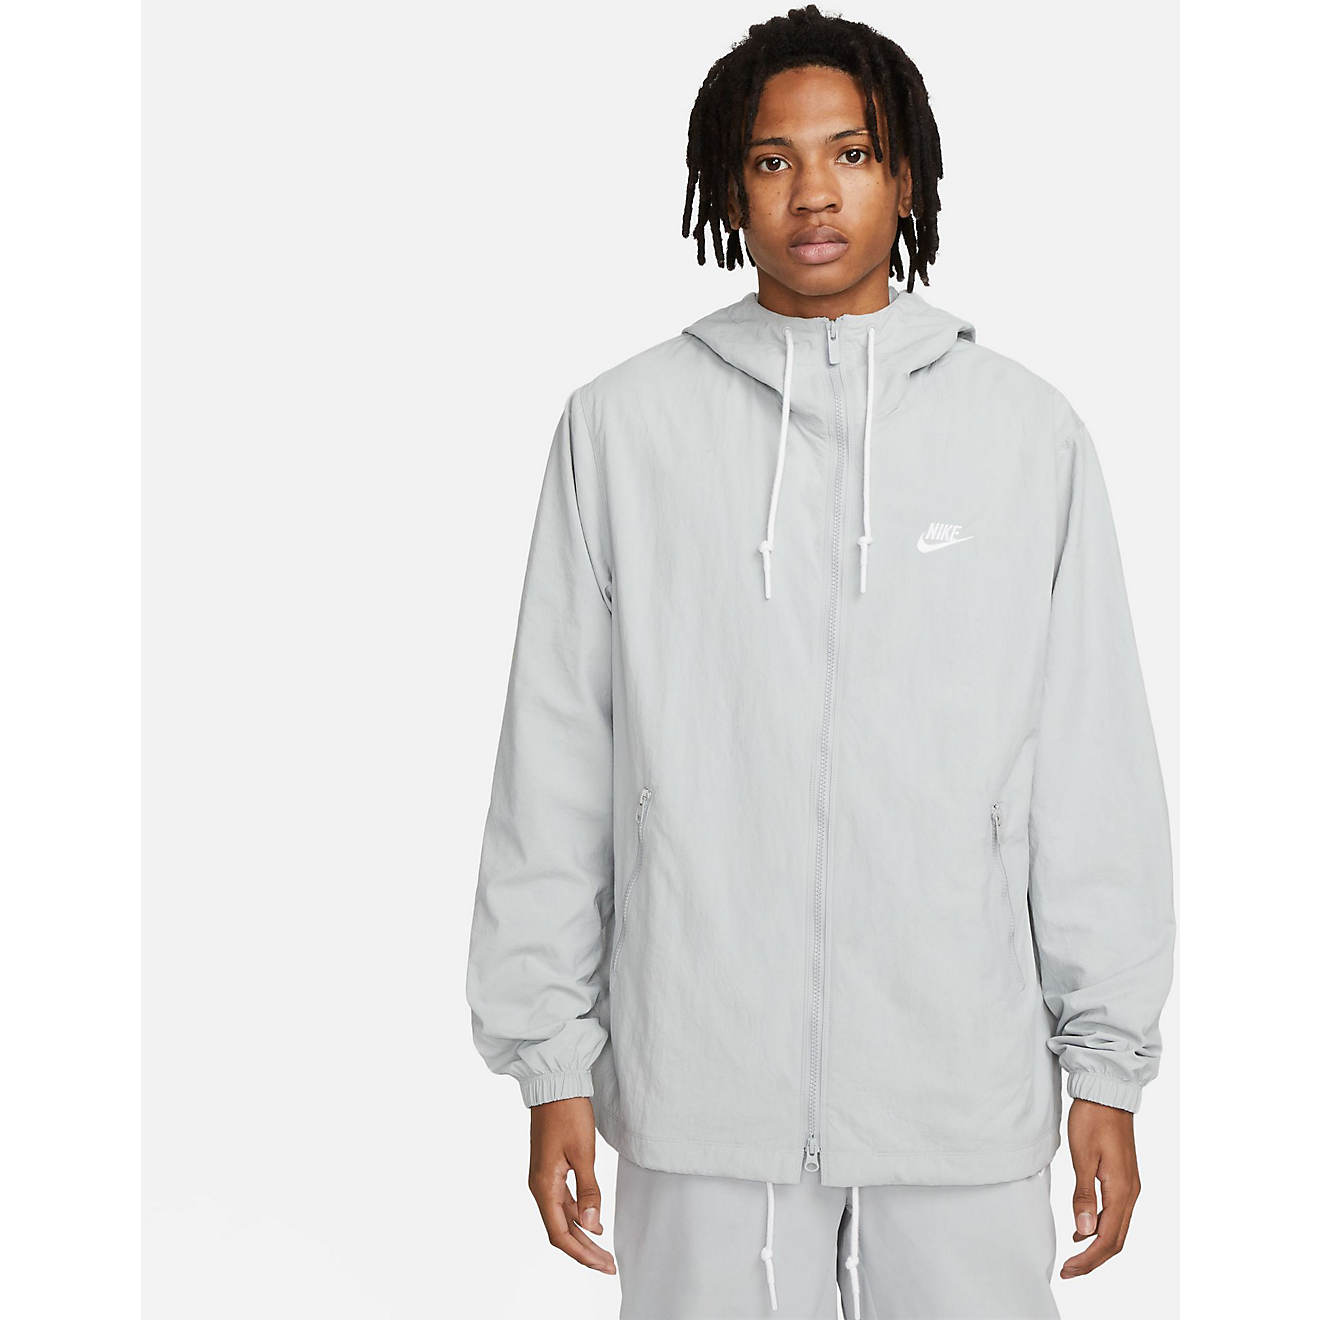 Nike Men's Club Full-Zip Woven Jacket | Free Shipping at Academy